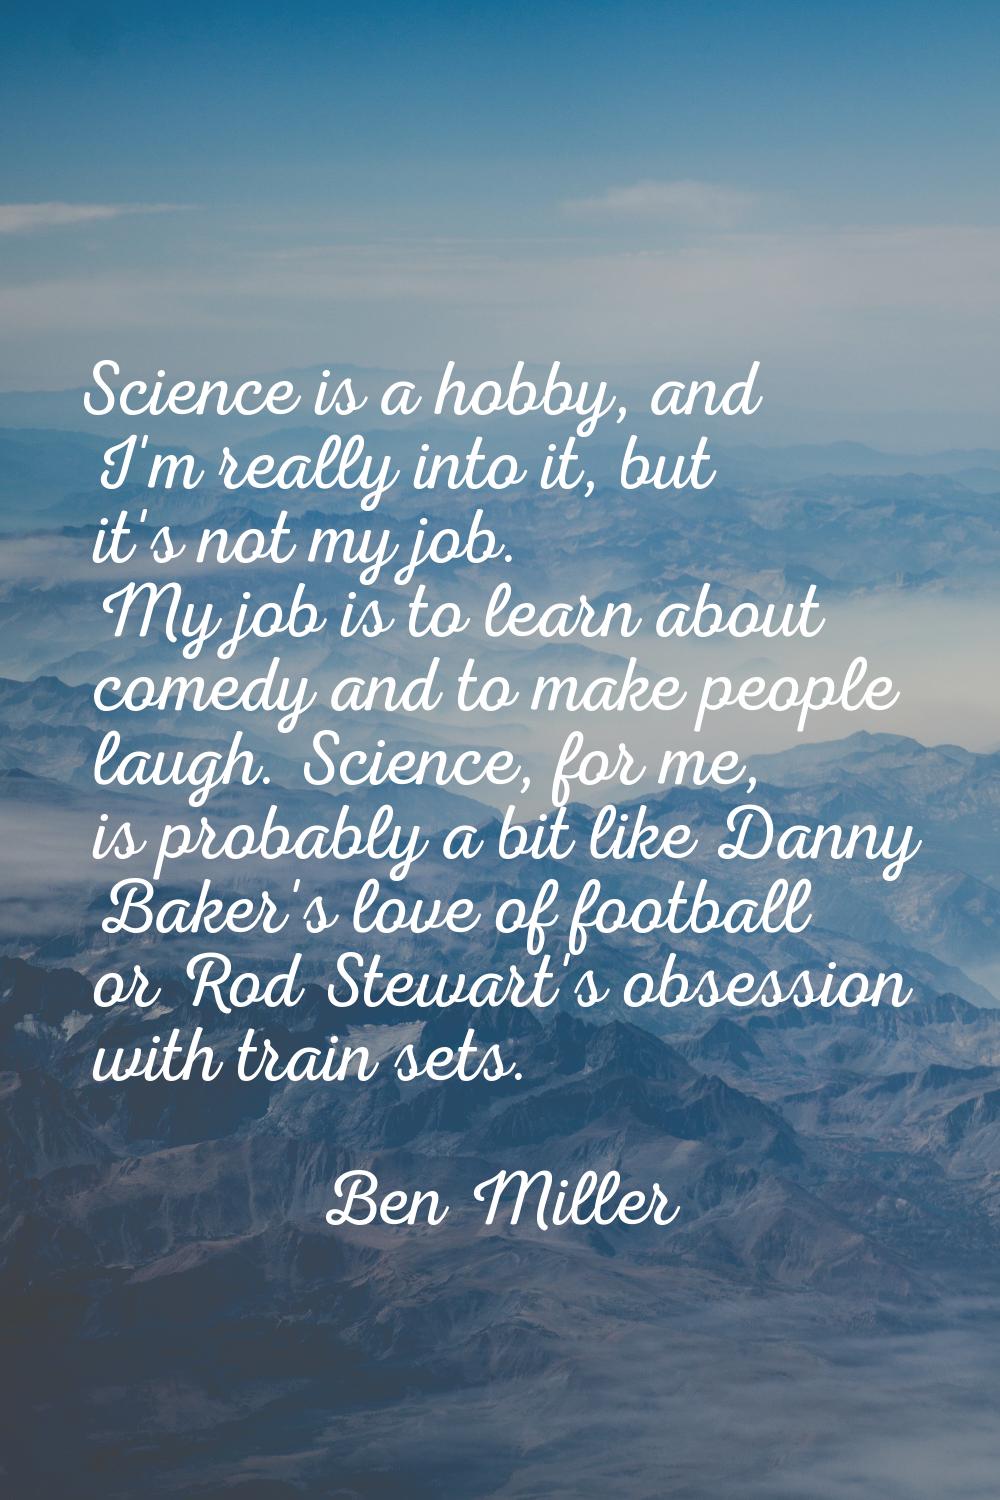 Science is a hobby, and I'm really into it, but it's not my job. My job is to learn about comedy an